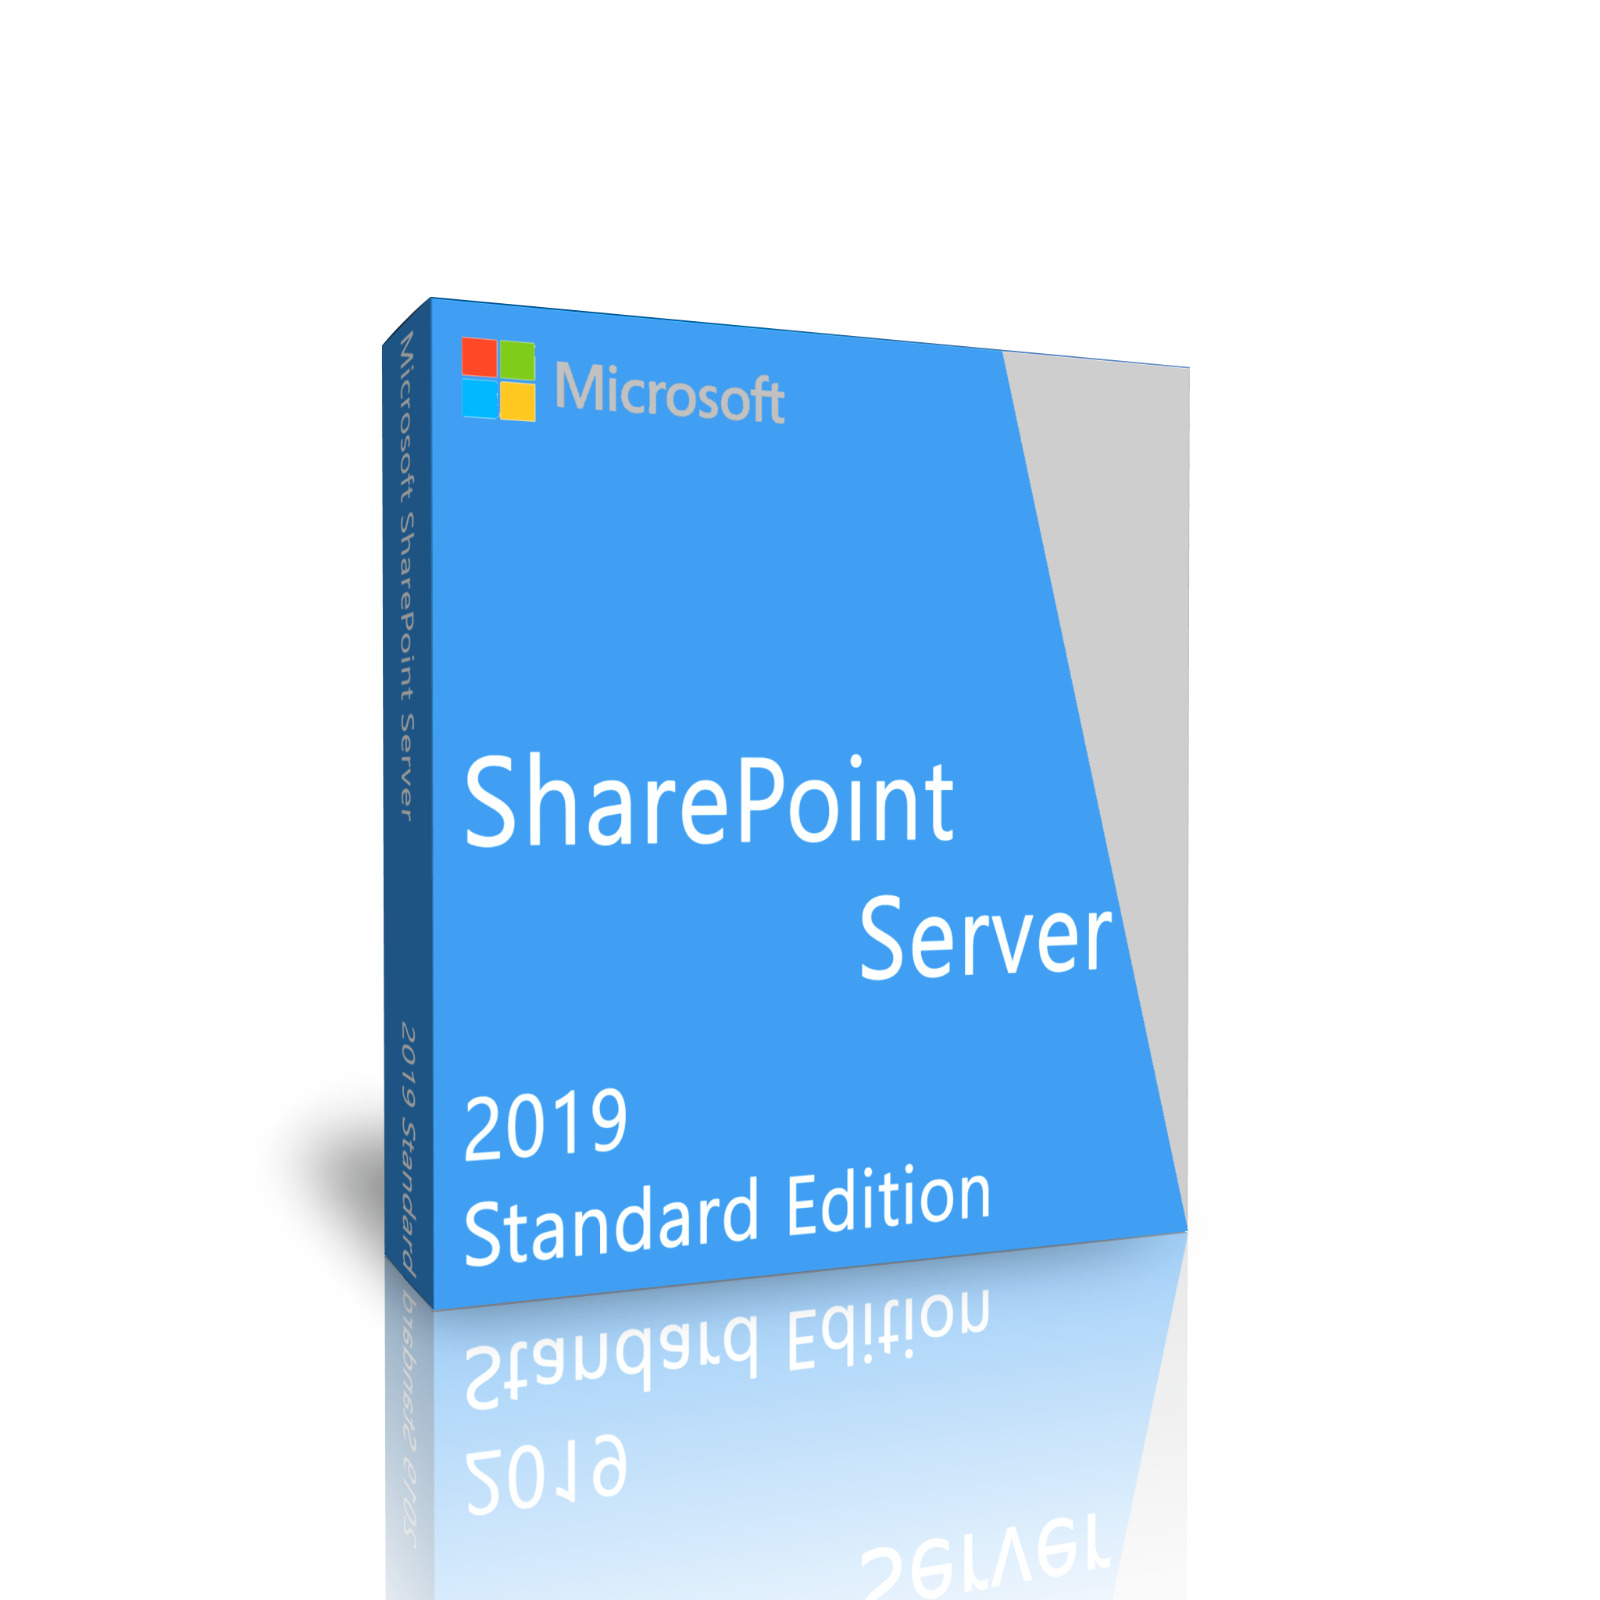 SharePoint Server 2019 Standard Edition 64 Bit with Unlimited User CALs.